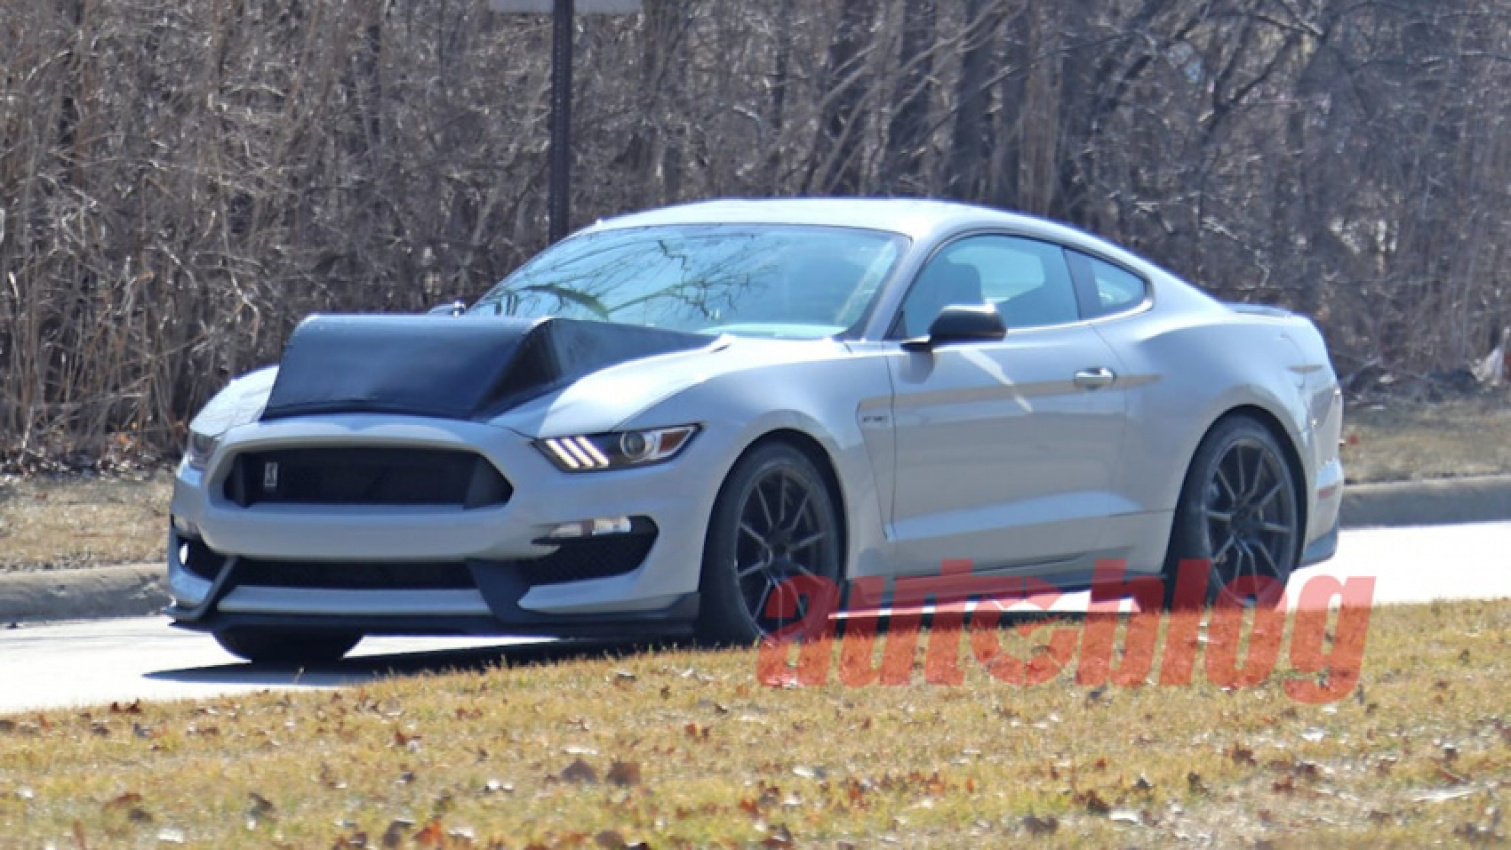 autos, cars, ford, rumormill, shelby, ford mustang, future vehicles, performance, spy-photos, what the hell is this ford mustang shelby gt350 mule?